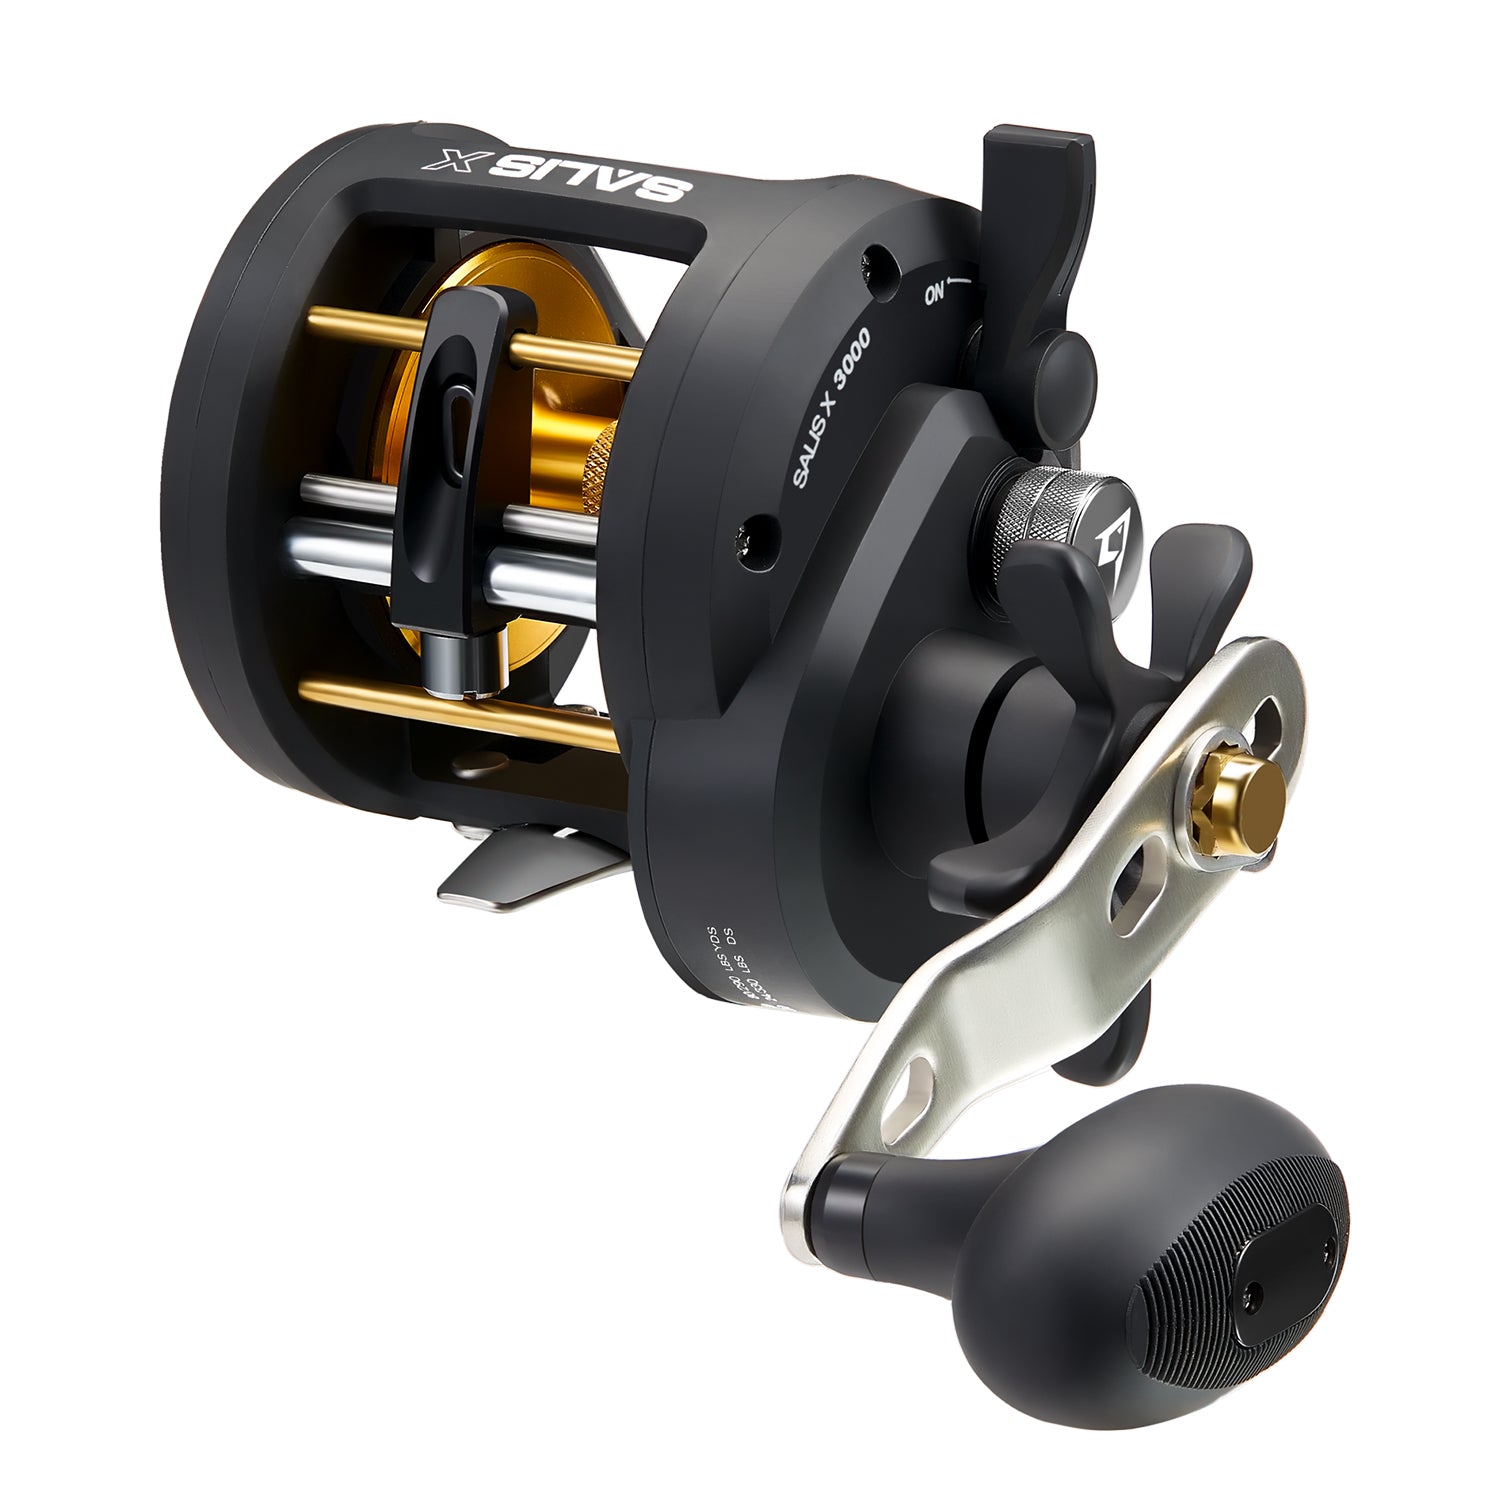 Fishing Reel,Metal Boat Fishing Wheel with Line Counter Baitcasting Fishing  Reel Wind Trolling Reel with Gear Ratio Durable Bearing for Inshore